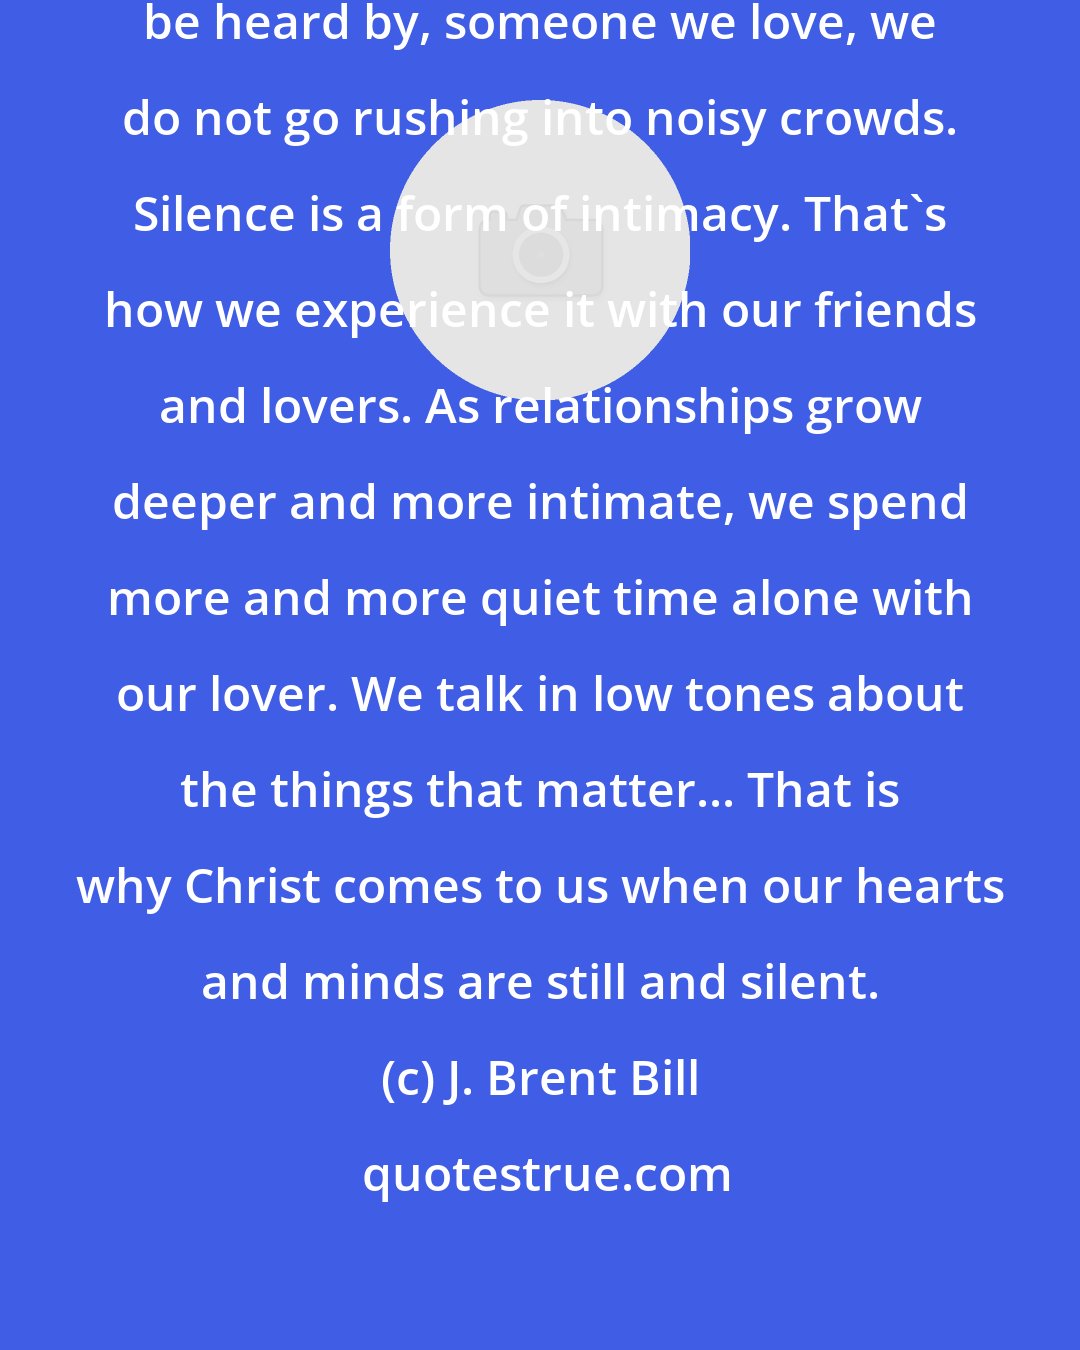 J. Brent Bill: When we really want to hear, and be heard by, someone we love, we do not go rushing into noisy crowds. Silence is a form of intimacy. That's how we experience it with our friends and lovers. As relationships grow deeper and more intimate, we spend more and more quiet time alone with our lover. We talk in low tones about the things that matter... That is why Christ comes to us when our hearts and minds are still and silent.